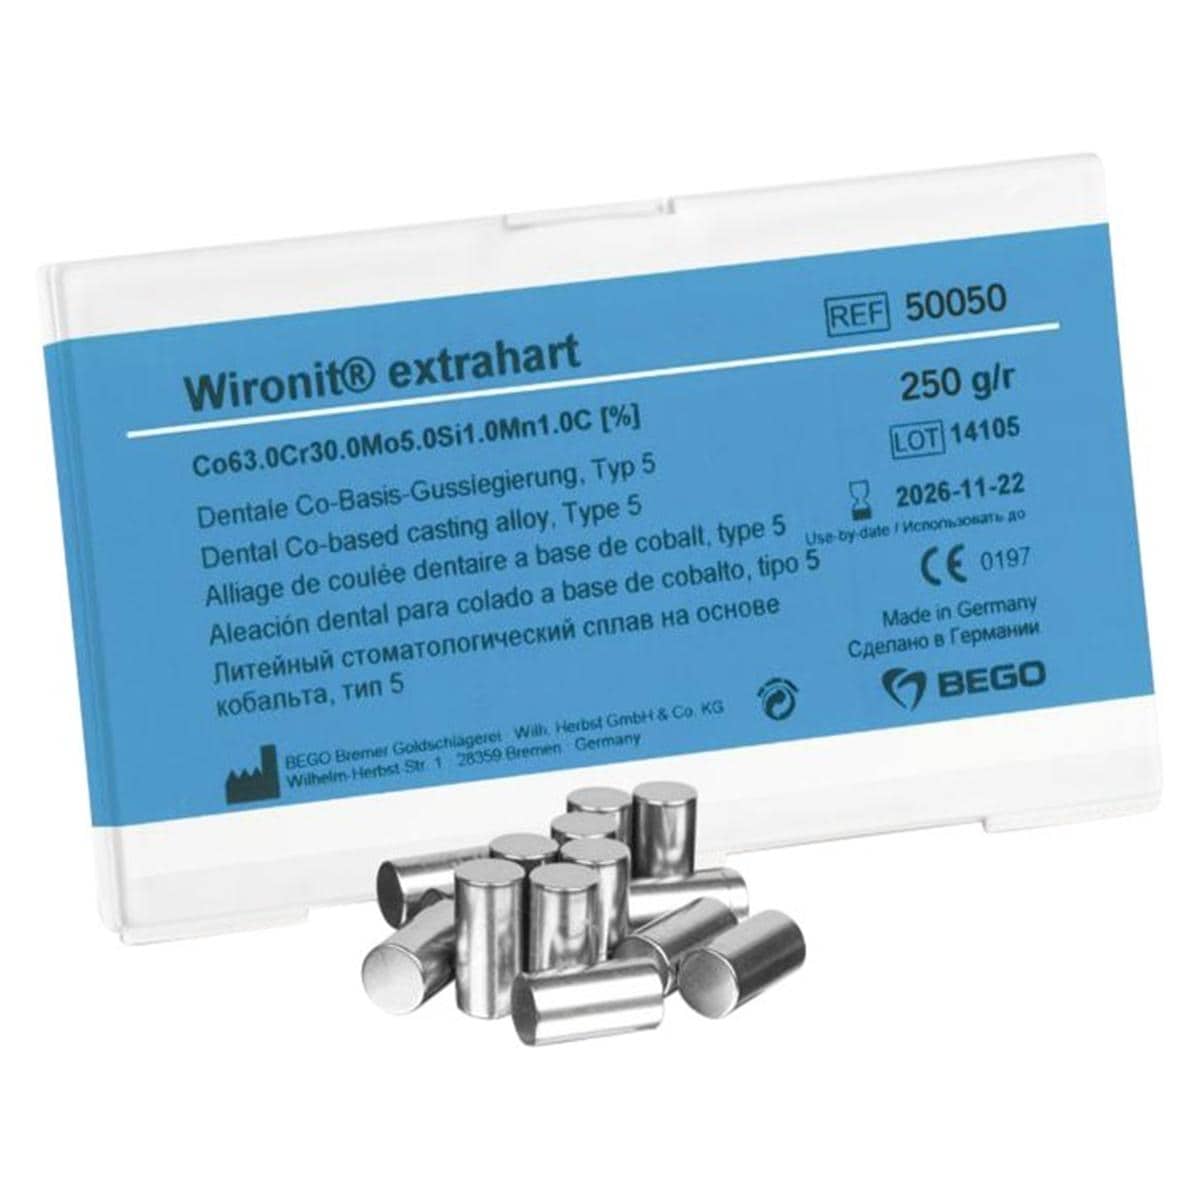 Wironit® extrahart - Packung 250 g